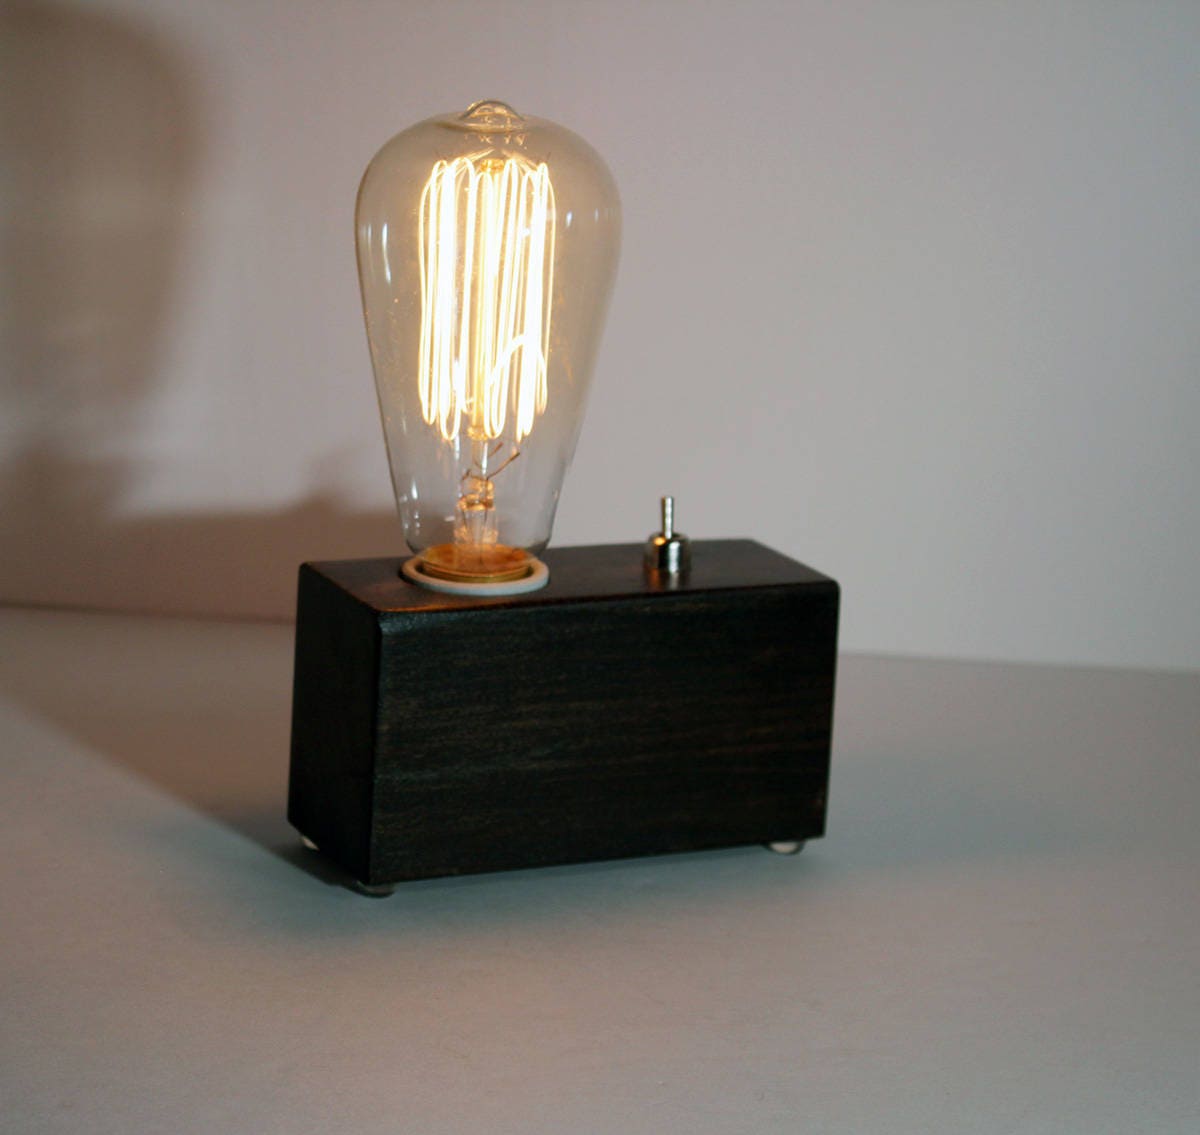 Personalized gift, Wood block lamp with Edison bulbs, Edison wood desk lamp, unique lighting